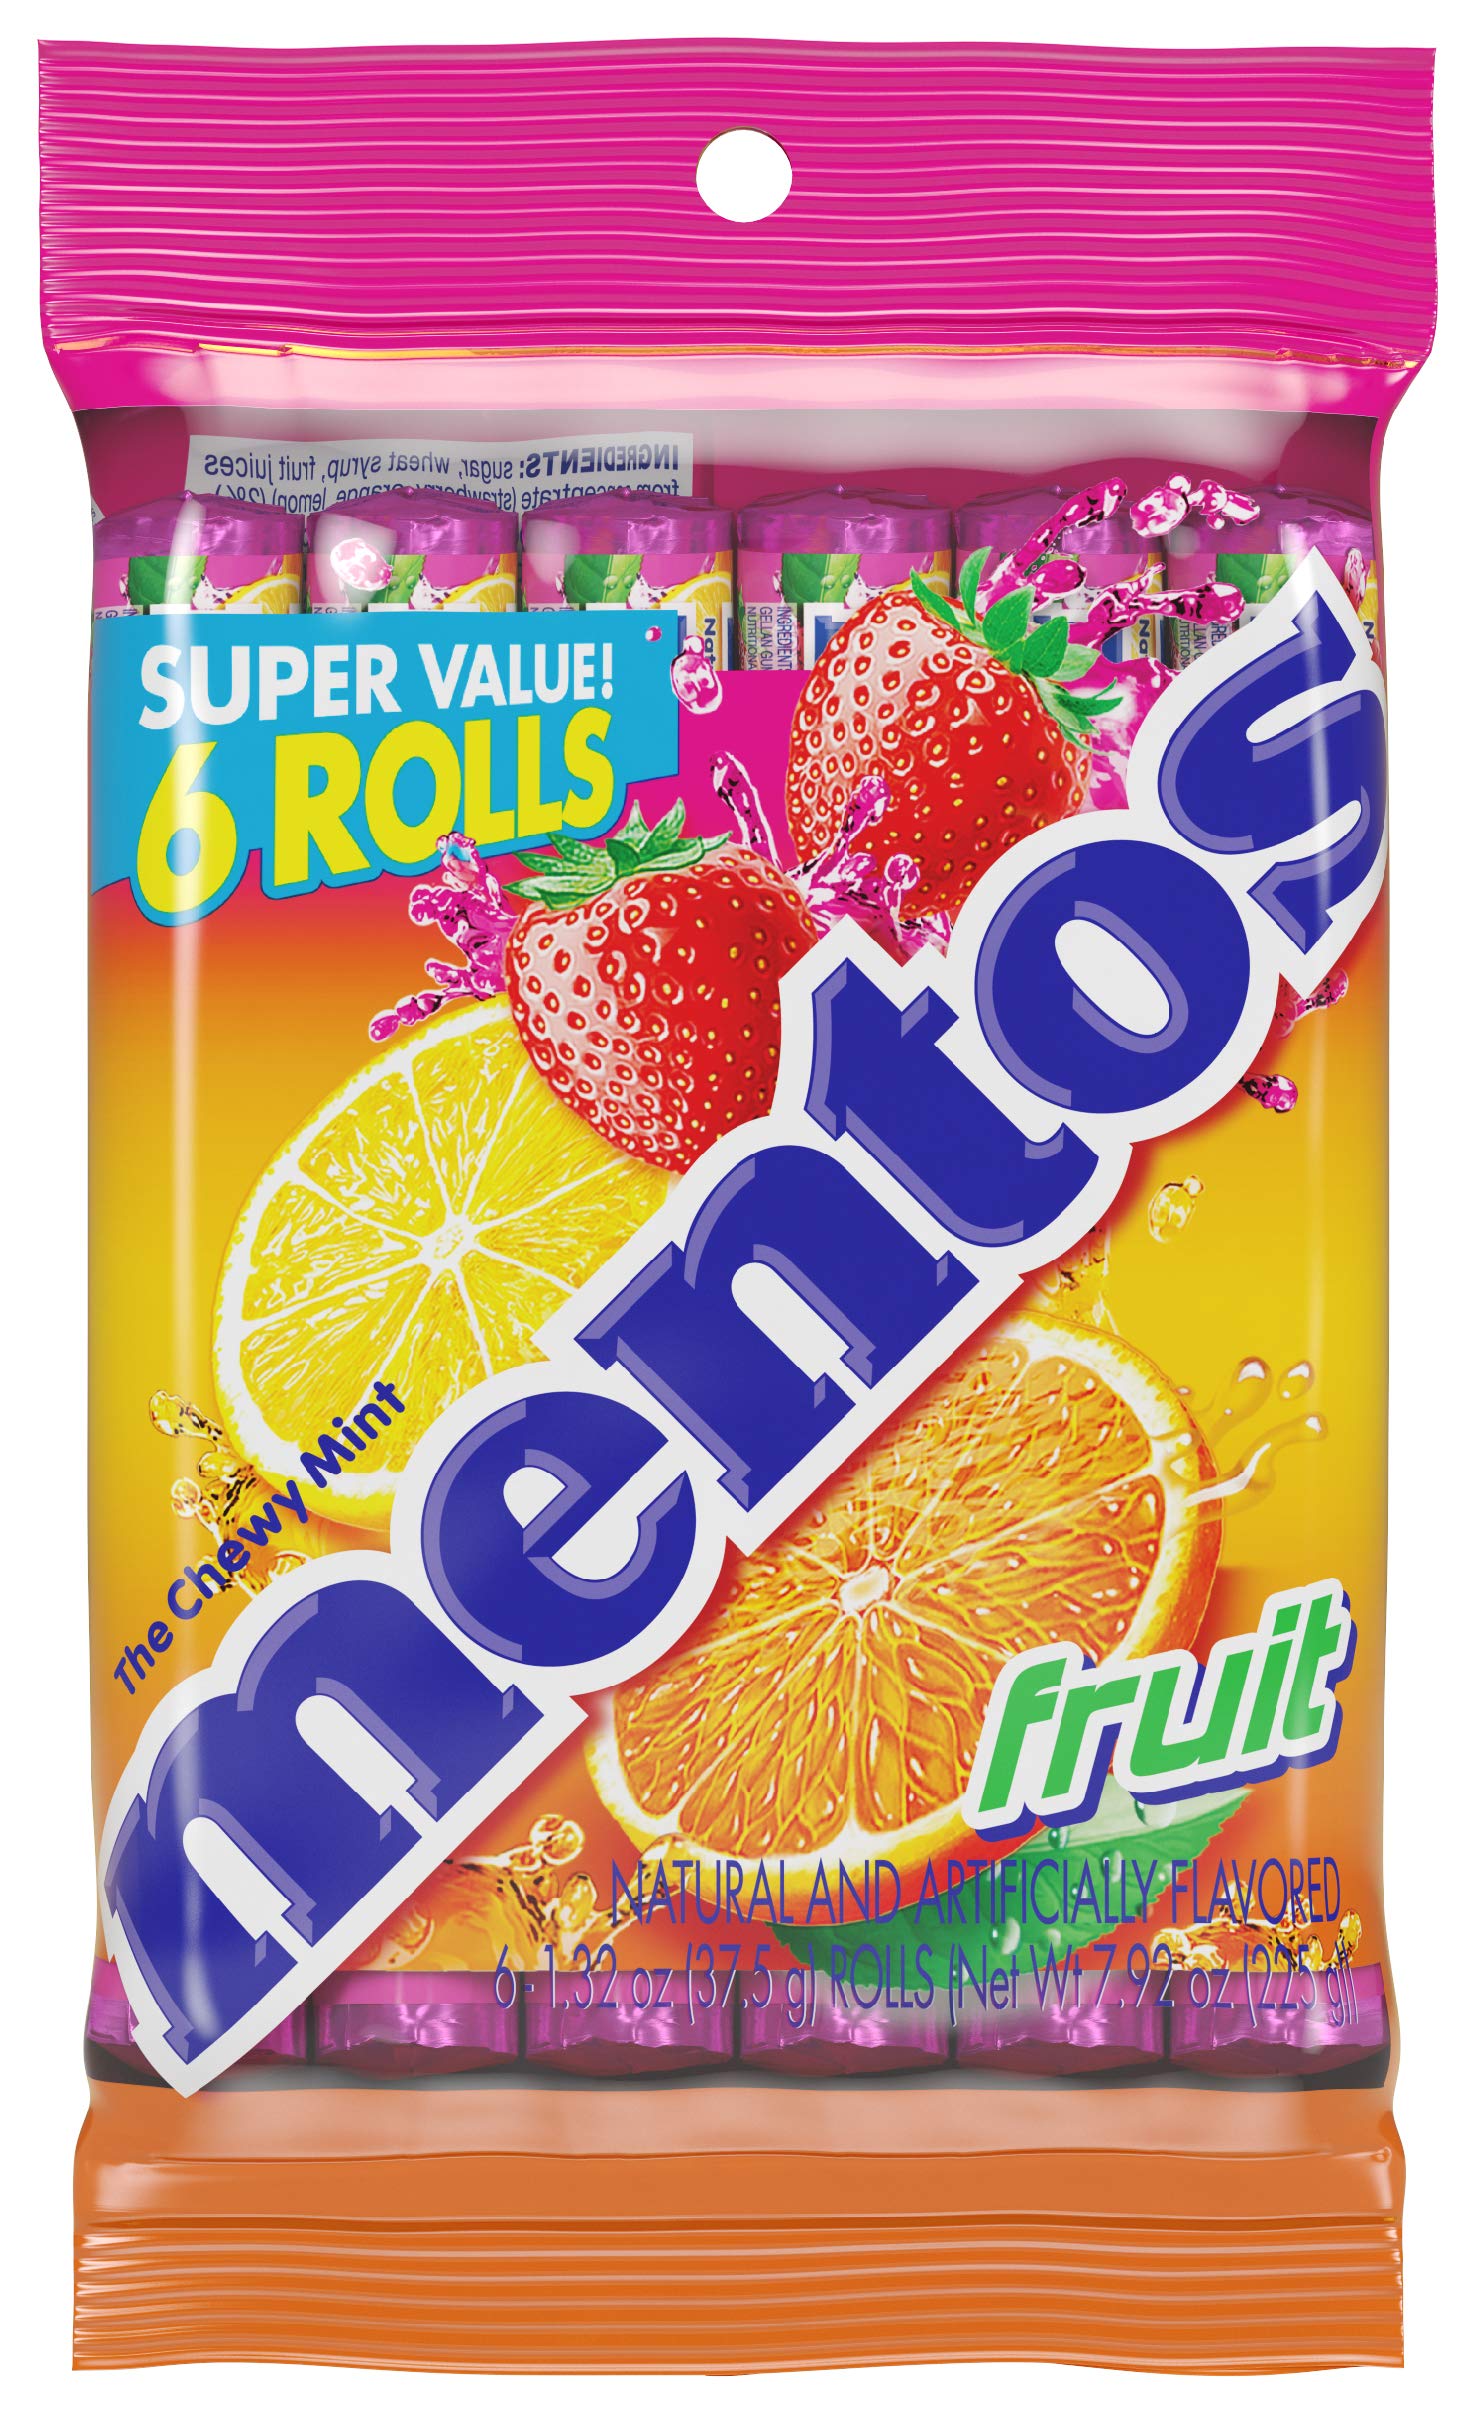 Mentos Candy, Mint Chewy Candy Roll, Fruit, Non Melting, (Pack of 6) $3.25 w/5+S&S, $3.44 w/<5 S&S at Amazon